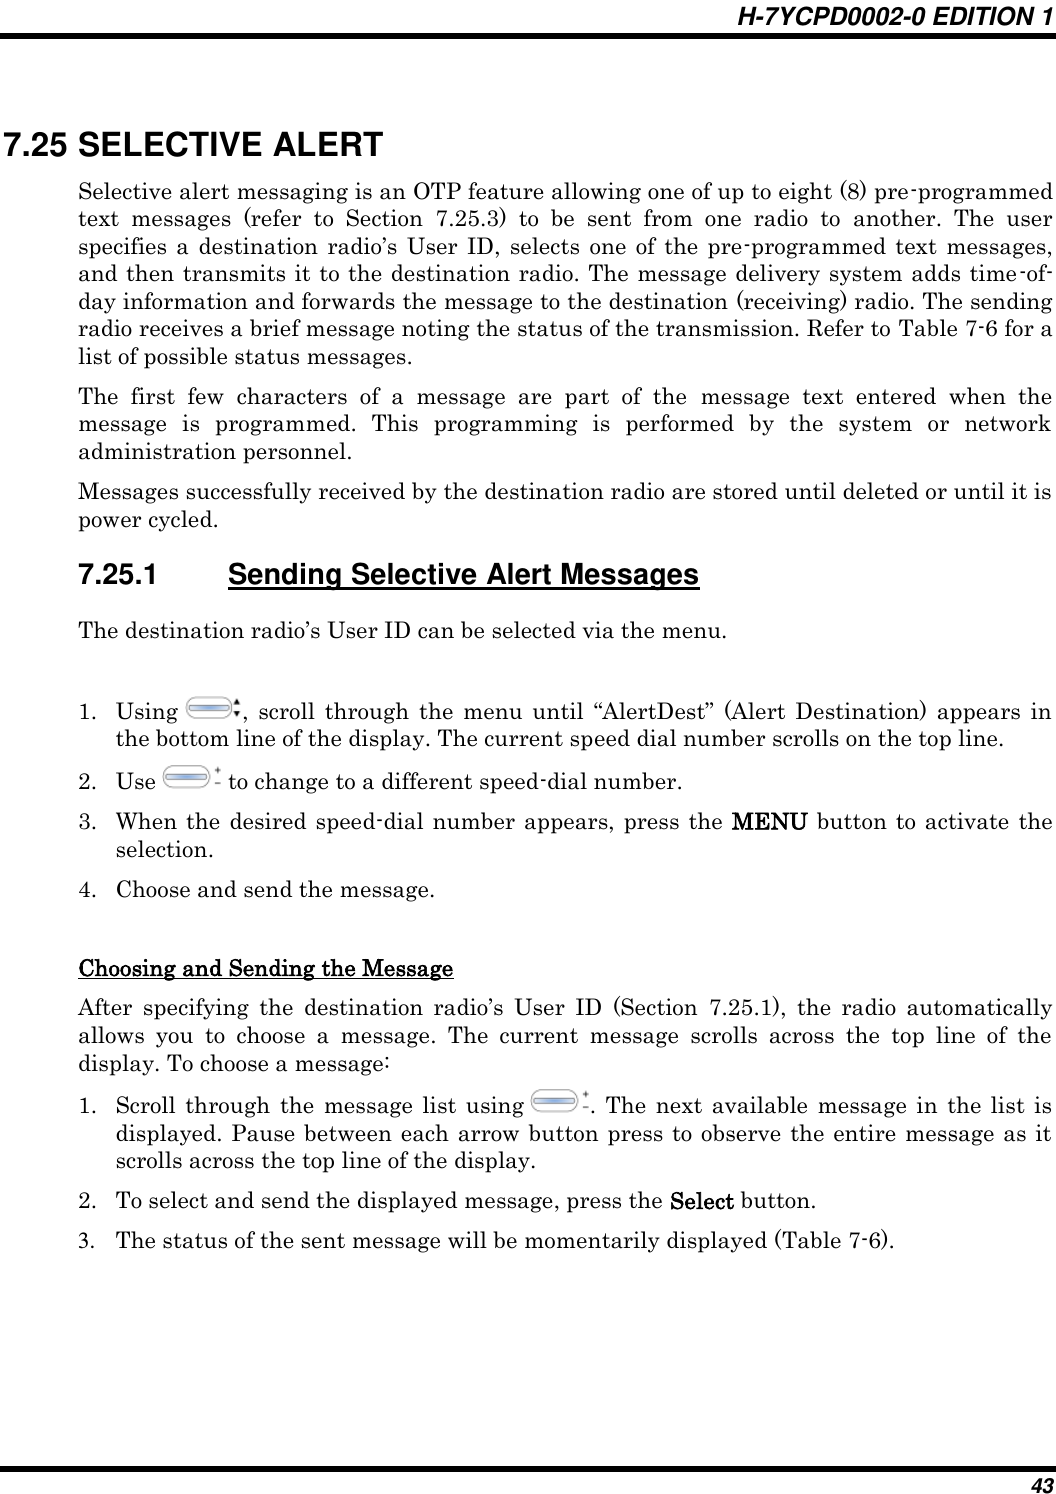 H-7YCPD0002-0 EDITION 1 43  7.25 SELECTIVE ALERT Selective alert messaging is an OTP feature allowing one of up to eight (8) pre-programmed text  messages  (refer  to  Section  7.25.3)  to  be  sent  from  one  radio  to  another.  The  user specifies  a  destination  radio‟s  User ID, selects  one  of  the  pre-programmed  text messages, and then transmits it to the destination radio. The message delivery system adds time-of-day information and forwards the message to the destination (receiving) radio. The sending radio receives a brief message noting the status of the transmission. Refer to Table 7-6 for a list of possible status messages. The  first  few  characters  of  a  message  are  part  of  the  message  text  entered  when  the message  is  programmed.  This  programming  is  performed  by  the  system  or  network administration personnel. Messages successfully received by the destination radio are stored until deleted or until it is power cycled. 7.25.1  Sending Selective Alert Messages The destination radio‟s User ID can be selected via the menu.  1. Using  ,  scroll  through  the  menu  until  “AlertDest”  (Alert  Destination) appears  in the bottom line of the display. The current speed dial number scrolls on the top line. 2. Use   to change to a different speed-dial number.  3. When the desired speed-dial number appears,  press  the  MENU button to activate the selection. 4. Choose and send the message.  Choosing and Sending the Message After  specifying  the  destination  radio‟s  User  ID  (Section  7.25.1),  the  radio  automatically allows  you  to  choose  a  message.  The  current  message  scrolls  across  the  top  line  of  the display. To choose a message: 1. Scroll  through  the message list using  . The next available  message in  the list  is displayed. Pause between each arrow button press to observe the entire message as it scrolls across the top line of the display. 2. To select and send the displayed message, press the Select button. 3. The status of the sent message will be momentarily displayed (Table 7-6). 